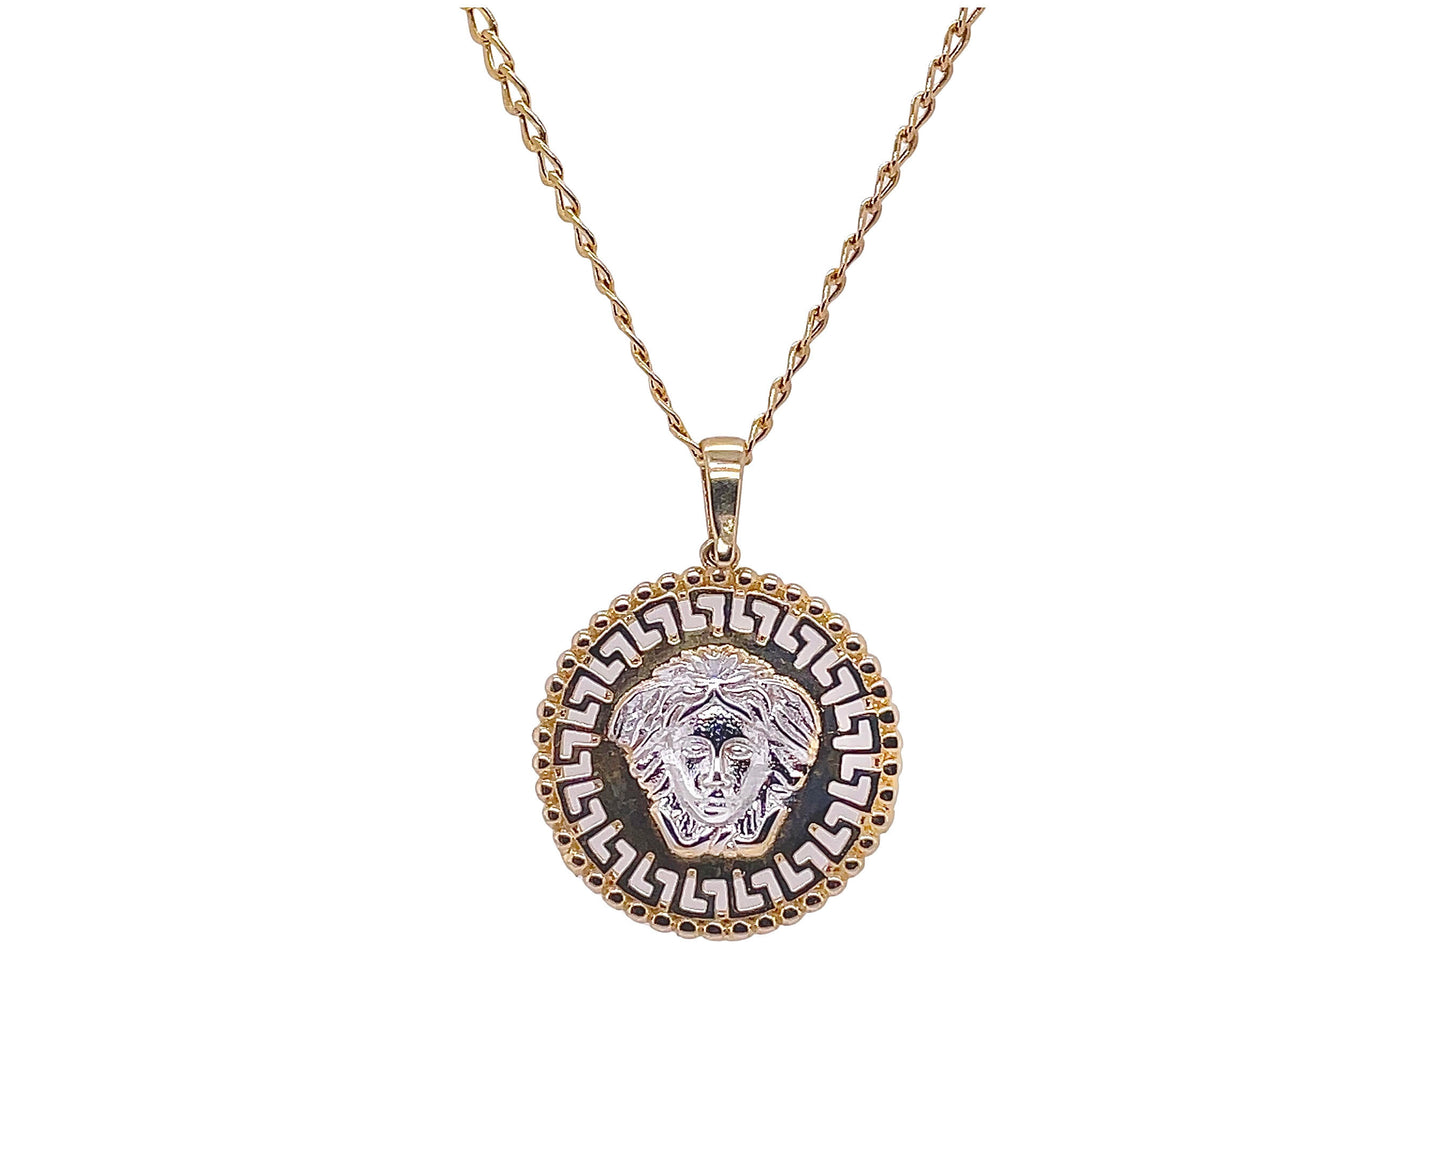 10K Yellow Gold Circle Versace-style Pendant With Chain